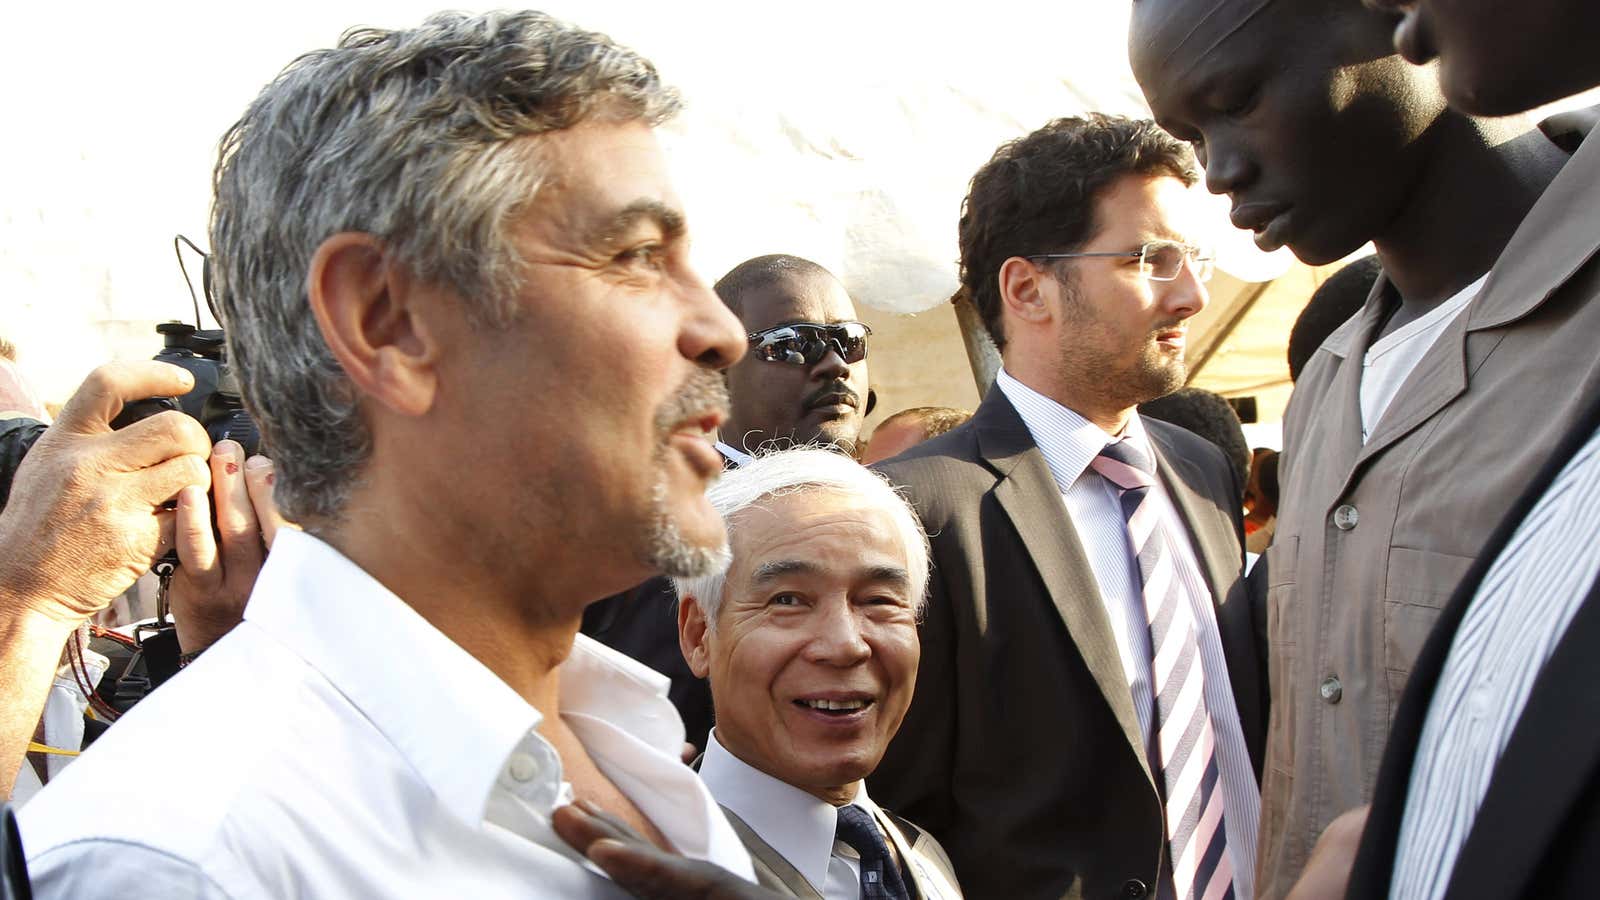 George Clooney makes his way through security to greet Southern Sudan President Salva Kiir after the South Sudan elections in 2011